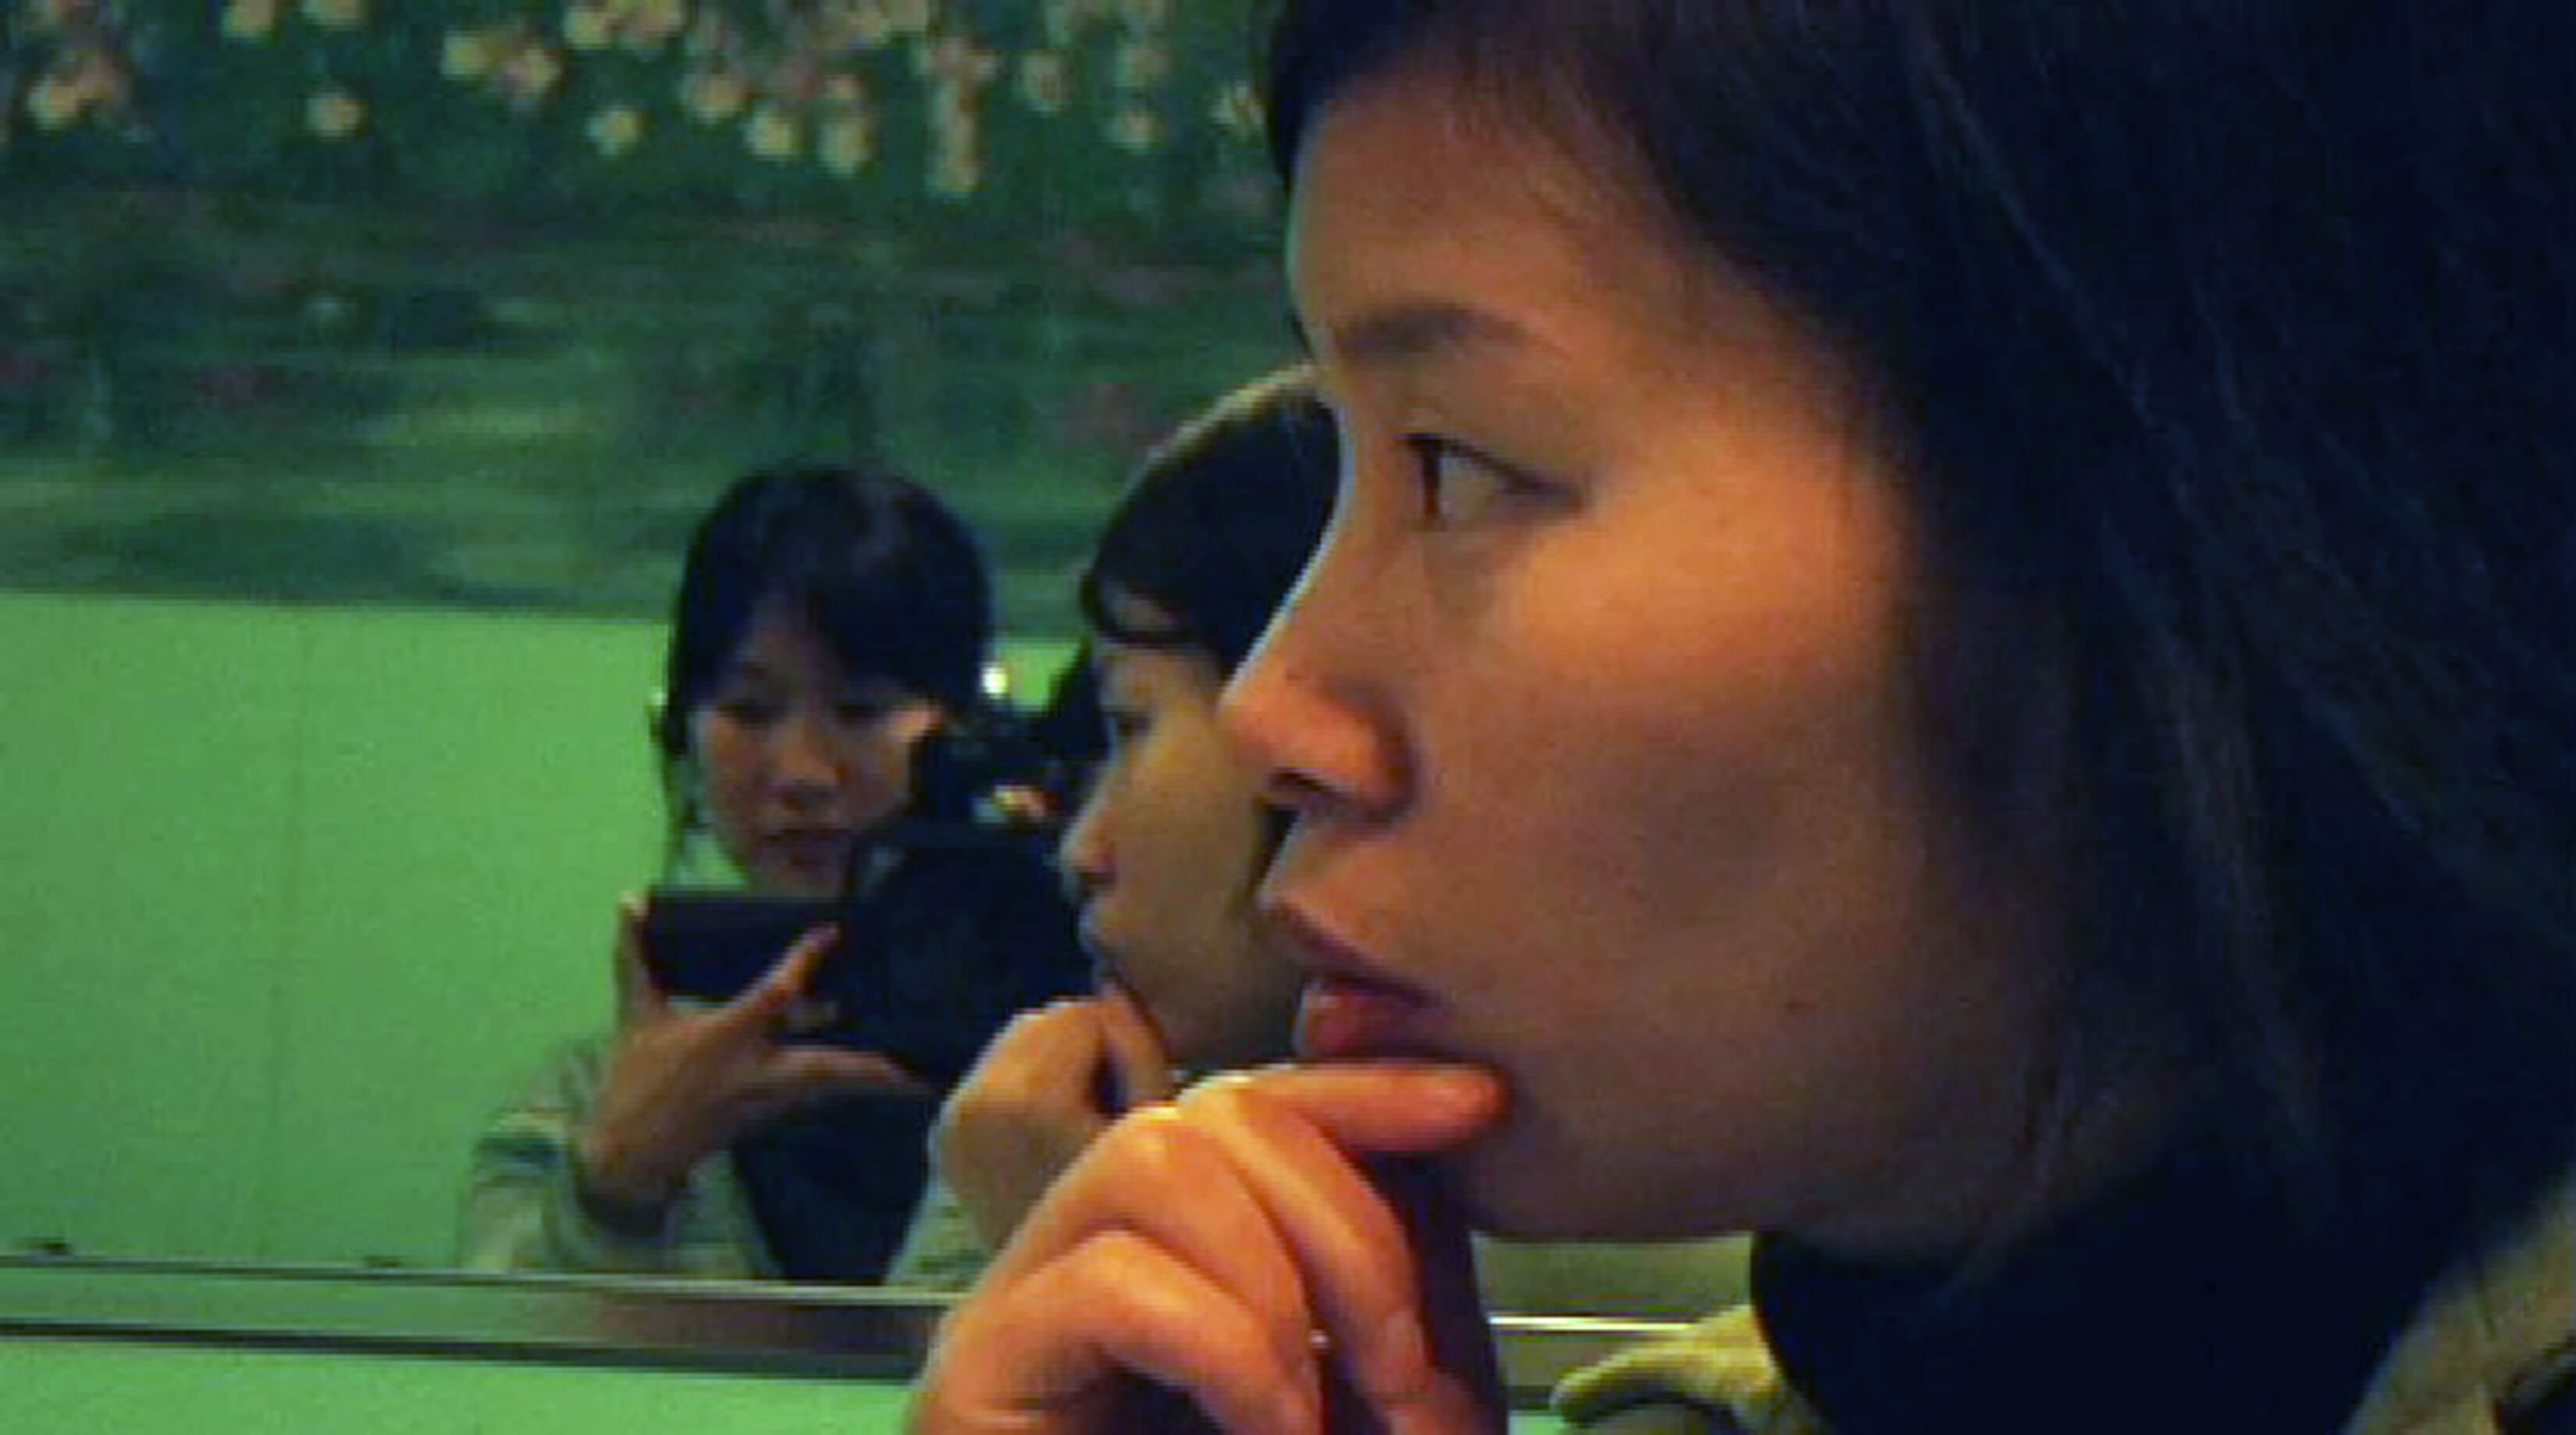 In the foreground a woman is looking away from the camera, her hand is touching her chin. In the background, there is a mirror reflection of Filmmaker Debbie Lum recording with a hand-held camera.